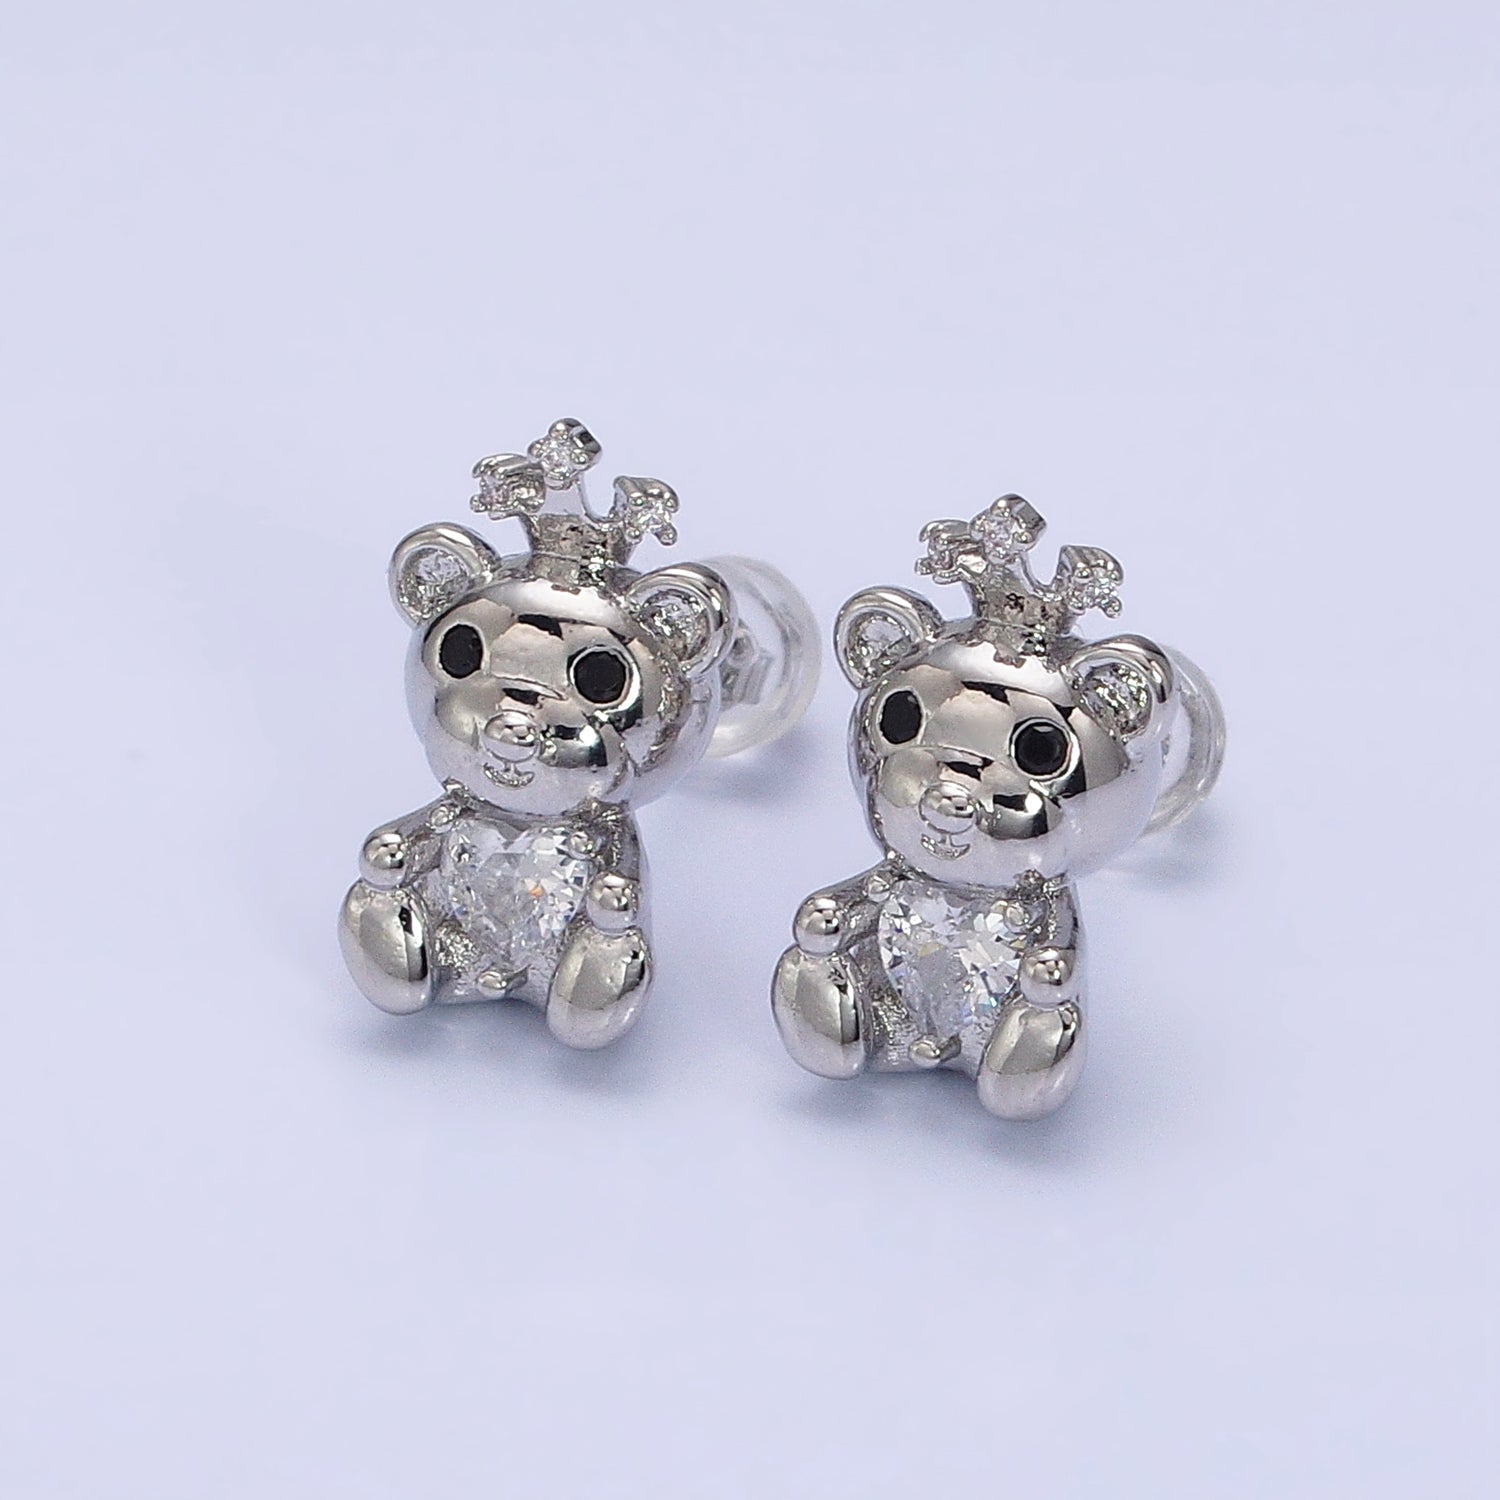 16K Gold Filled Crowned King Teddy Bear Clear CZ Heart Stud Earrings in Silver & Gold | AB1539 AD822